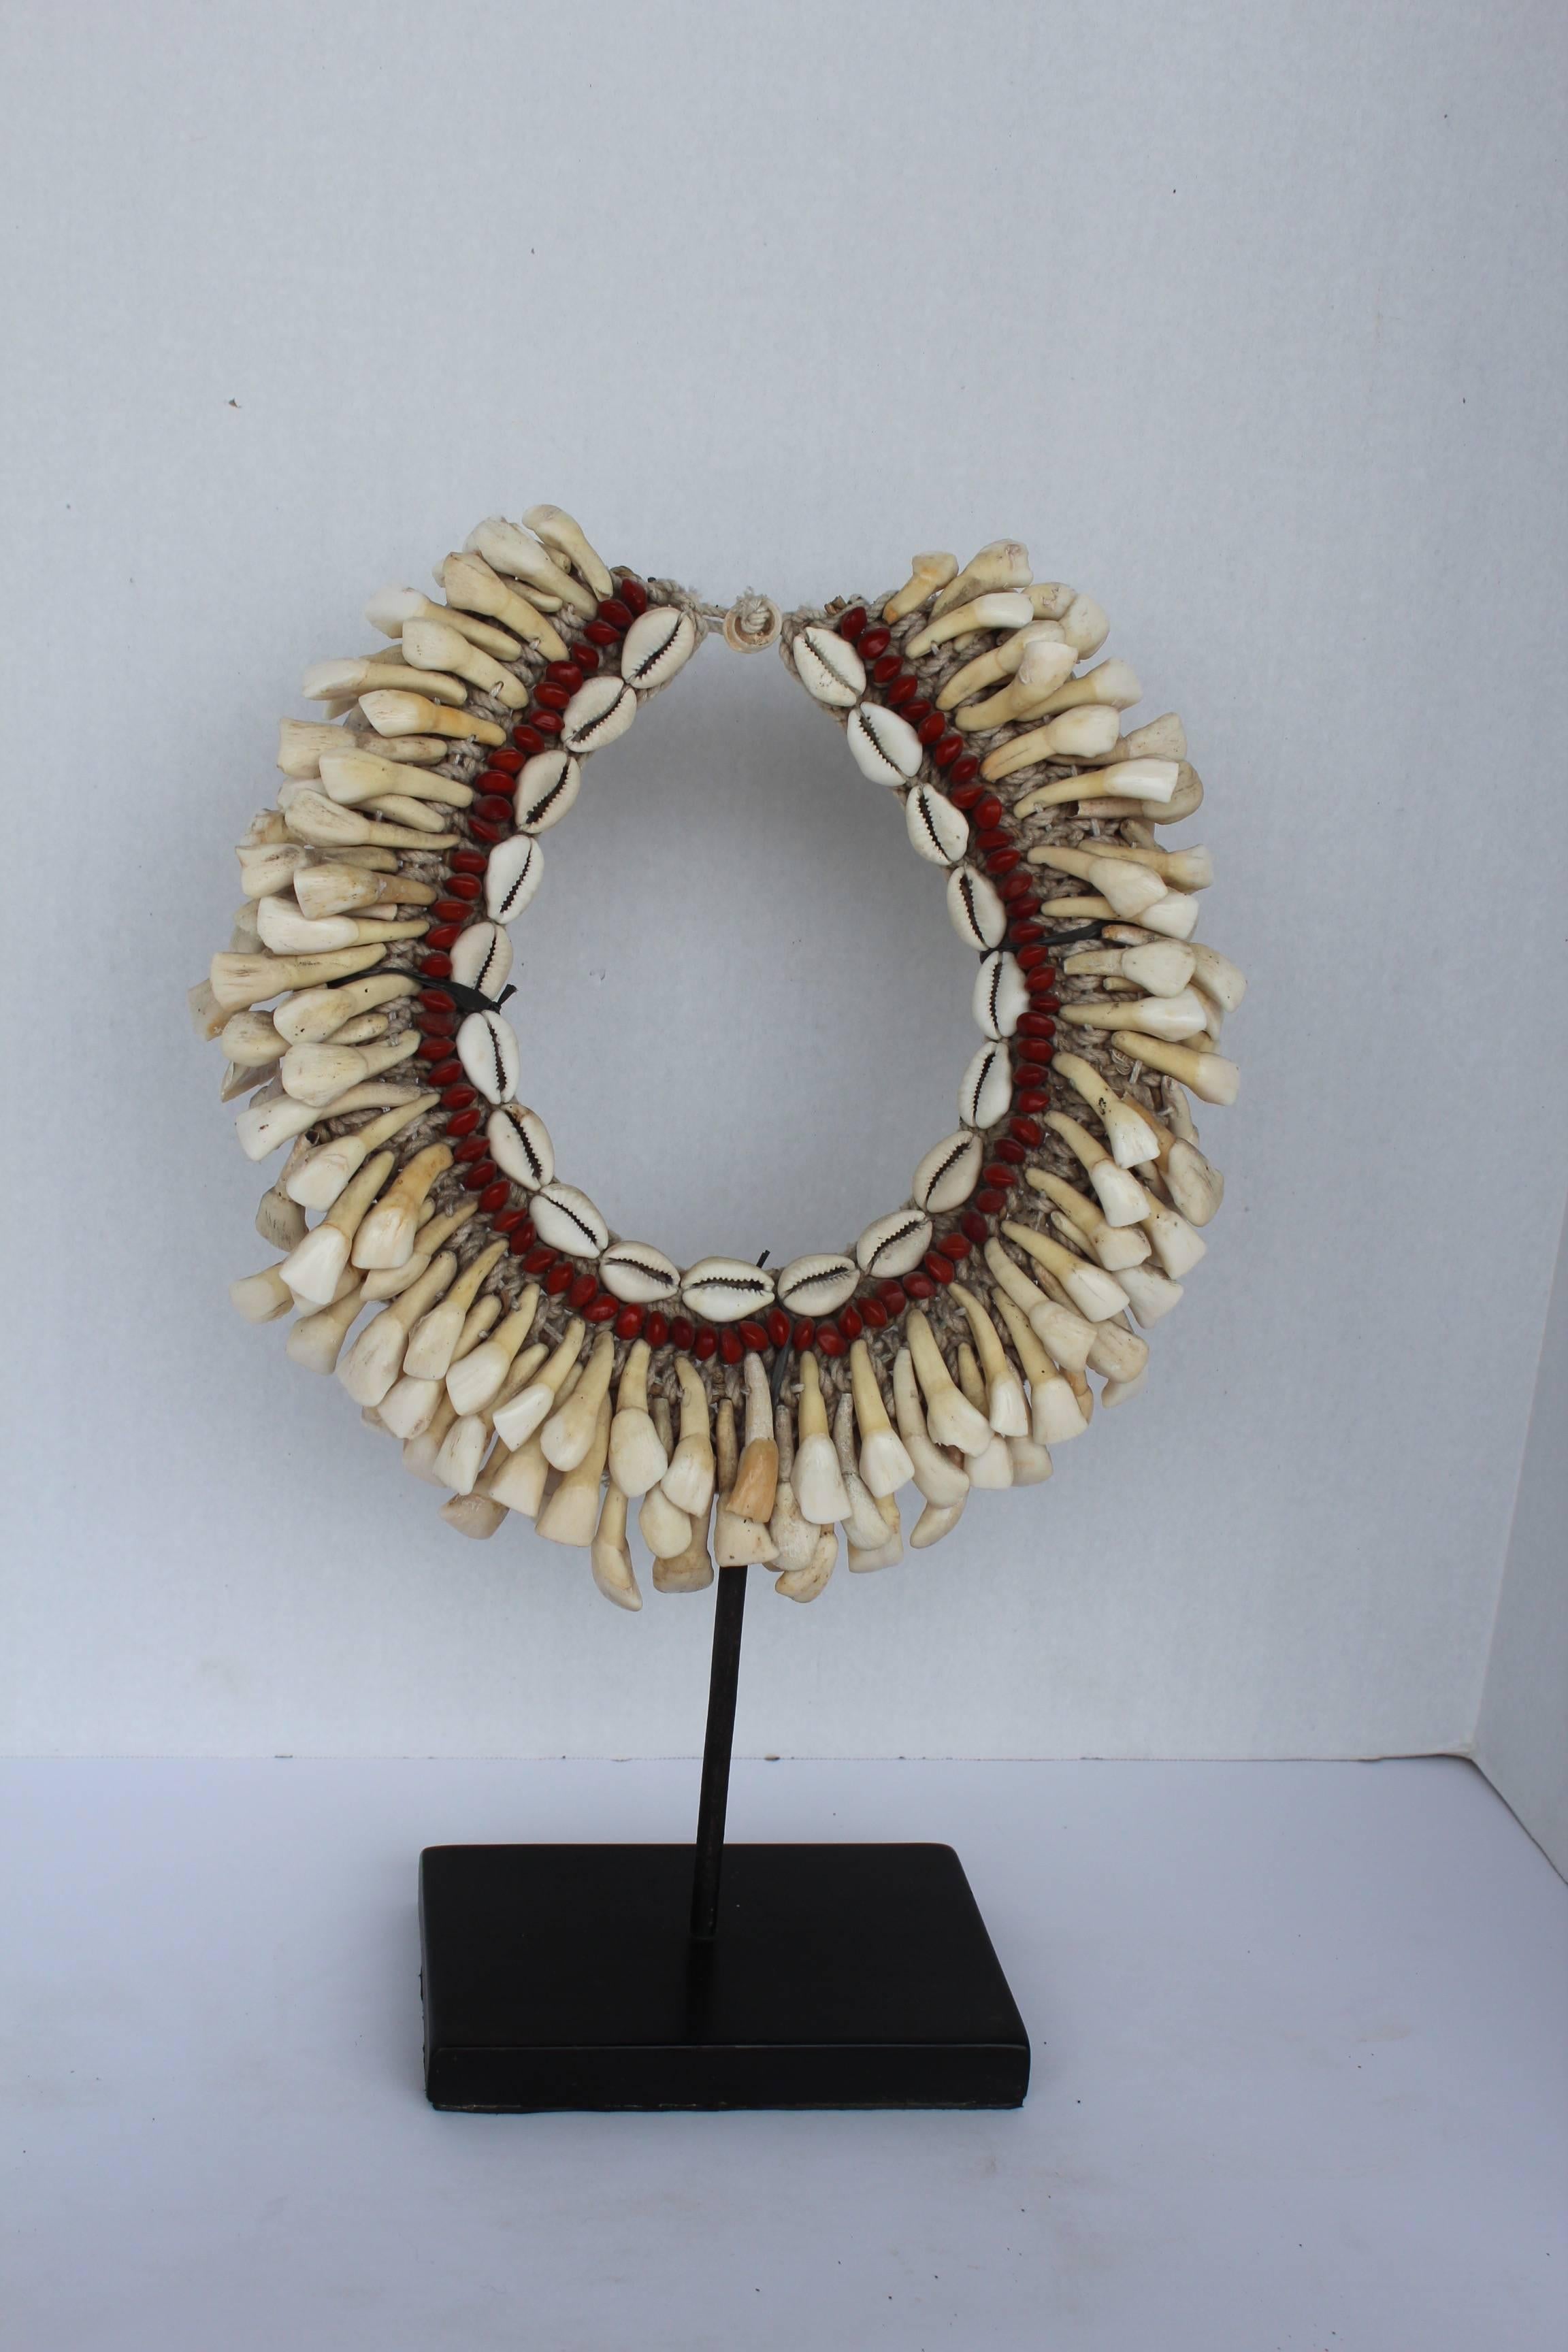 Three layers of antique buffalo teeth hand tied on handwoven hemp fiber collar with central band of red wood beads and cowry shells as necklace attached to custom stand. 

Buffalo teeth was once used as a form of currency or the bribe would wear it